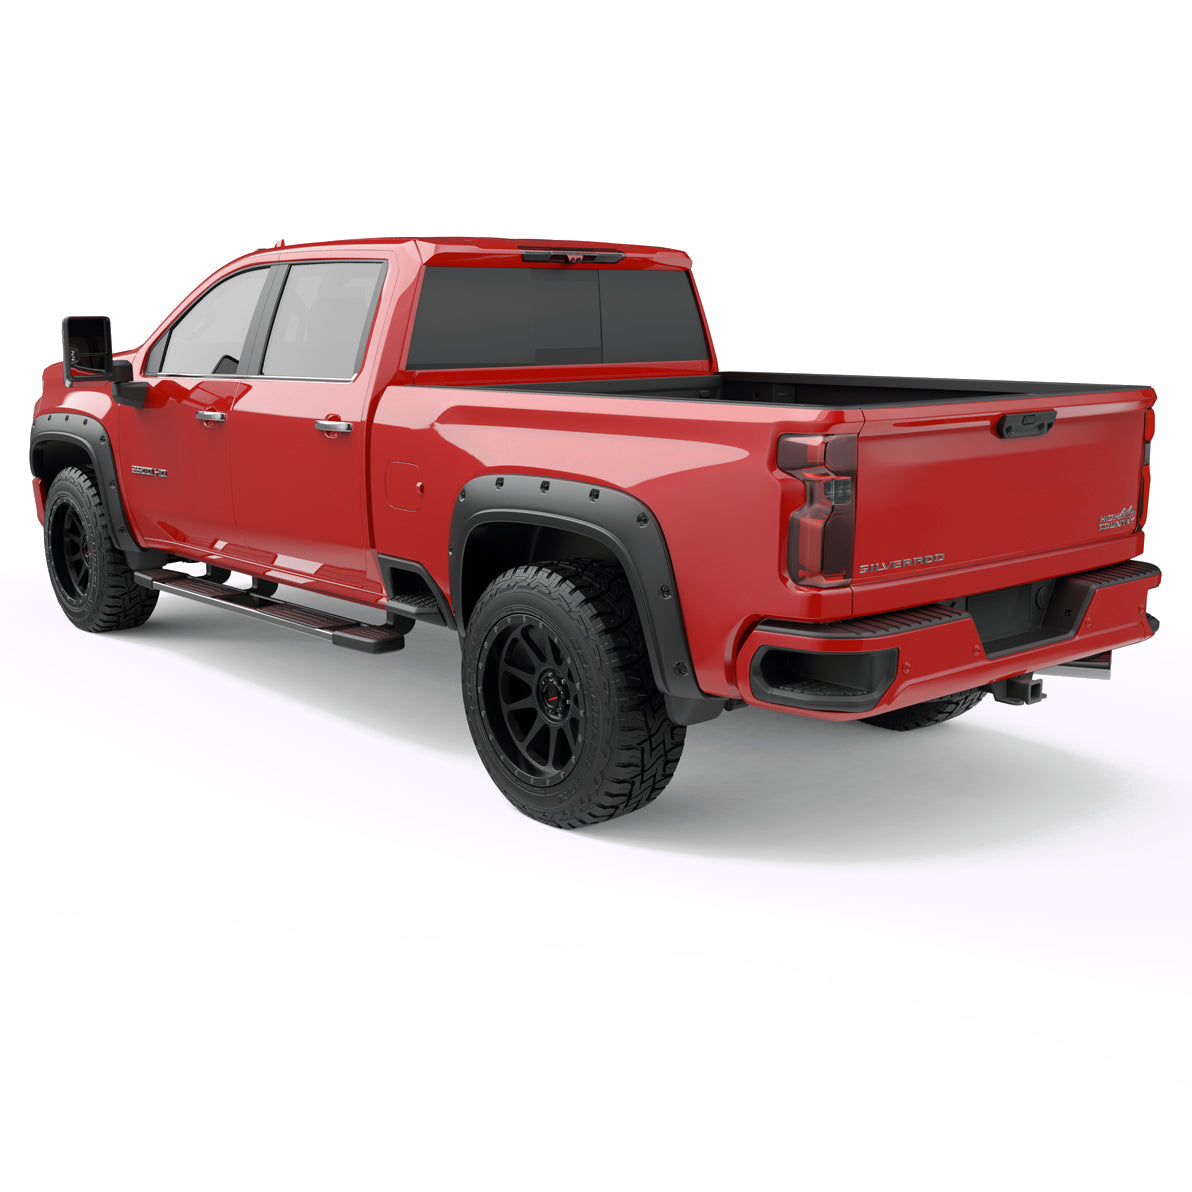 EGR Traditional Bolt-on look Fender Flares with Black-out Bolt Kit 20-22 Chevrolet Silverado 2500HD & 3500HD set of 4